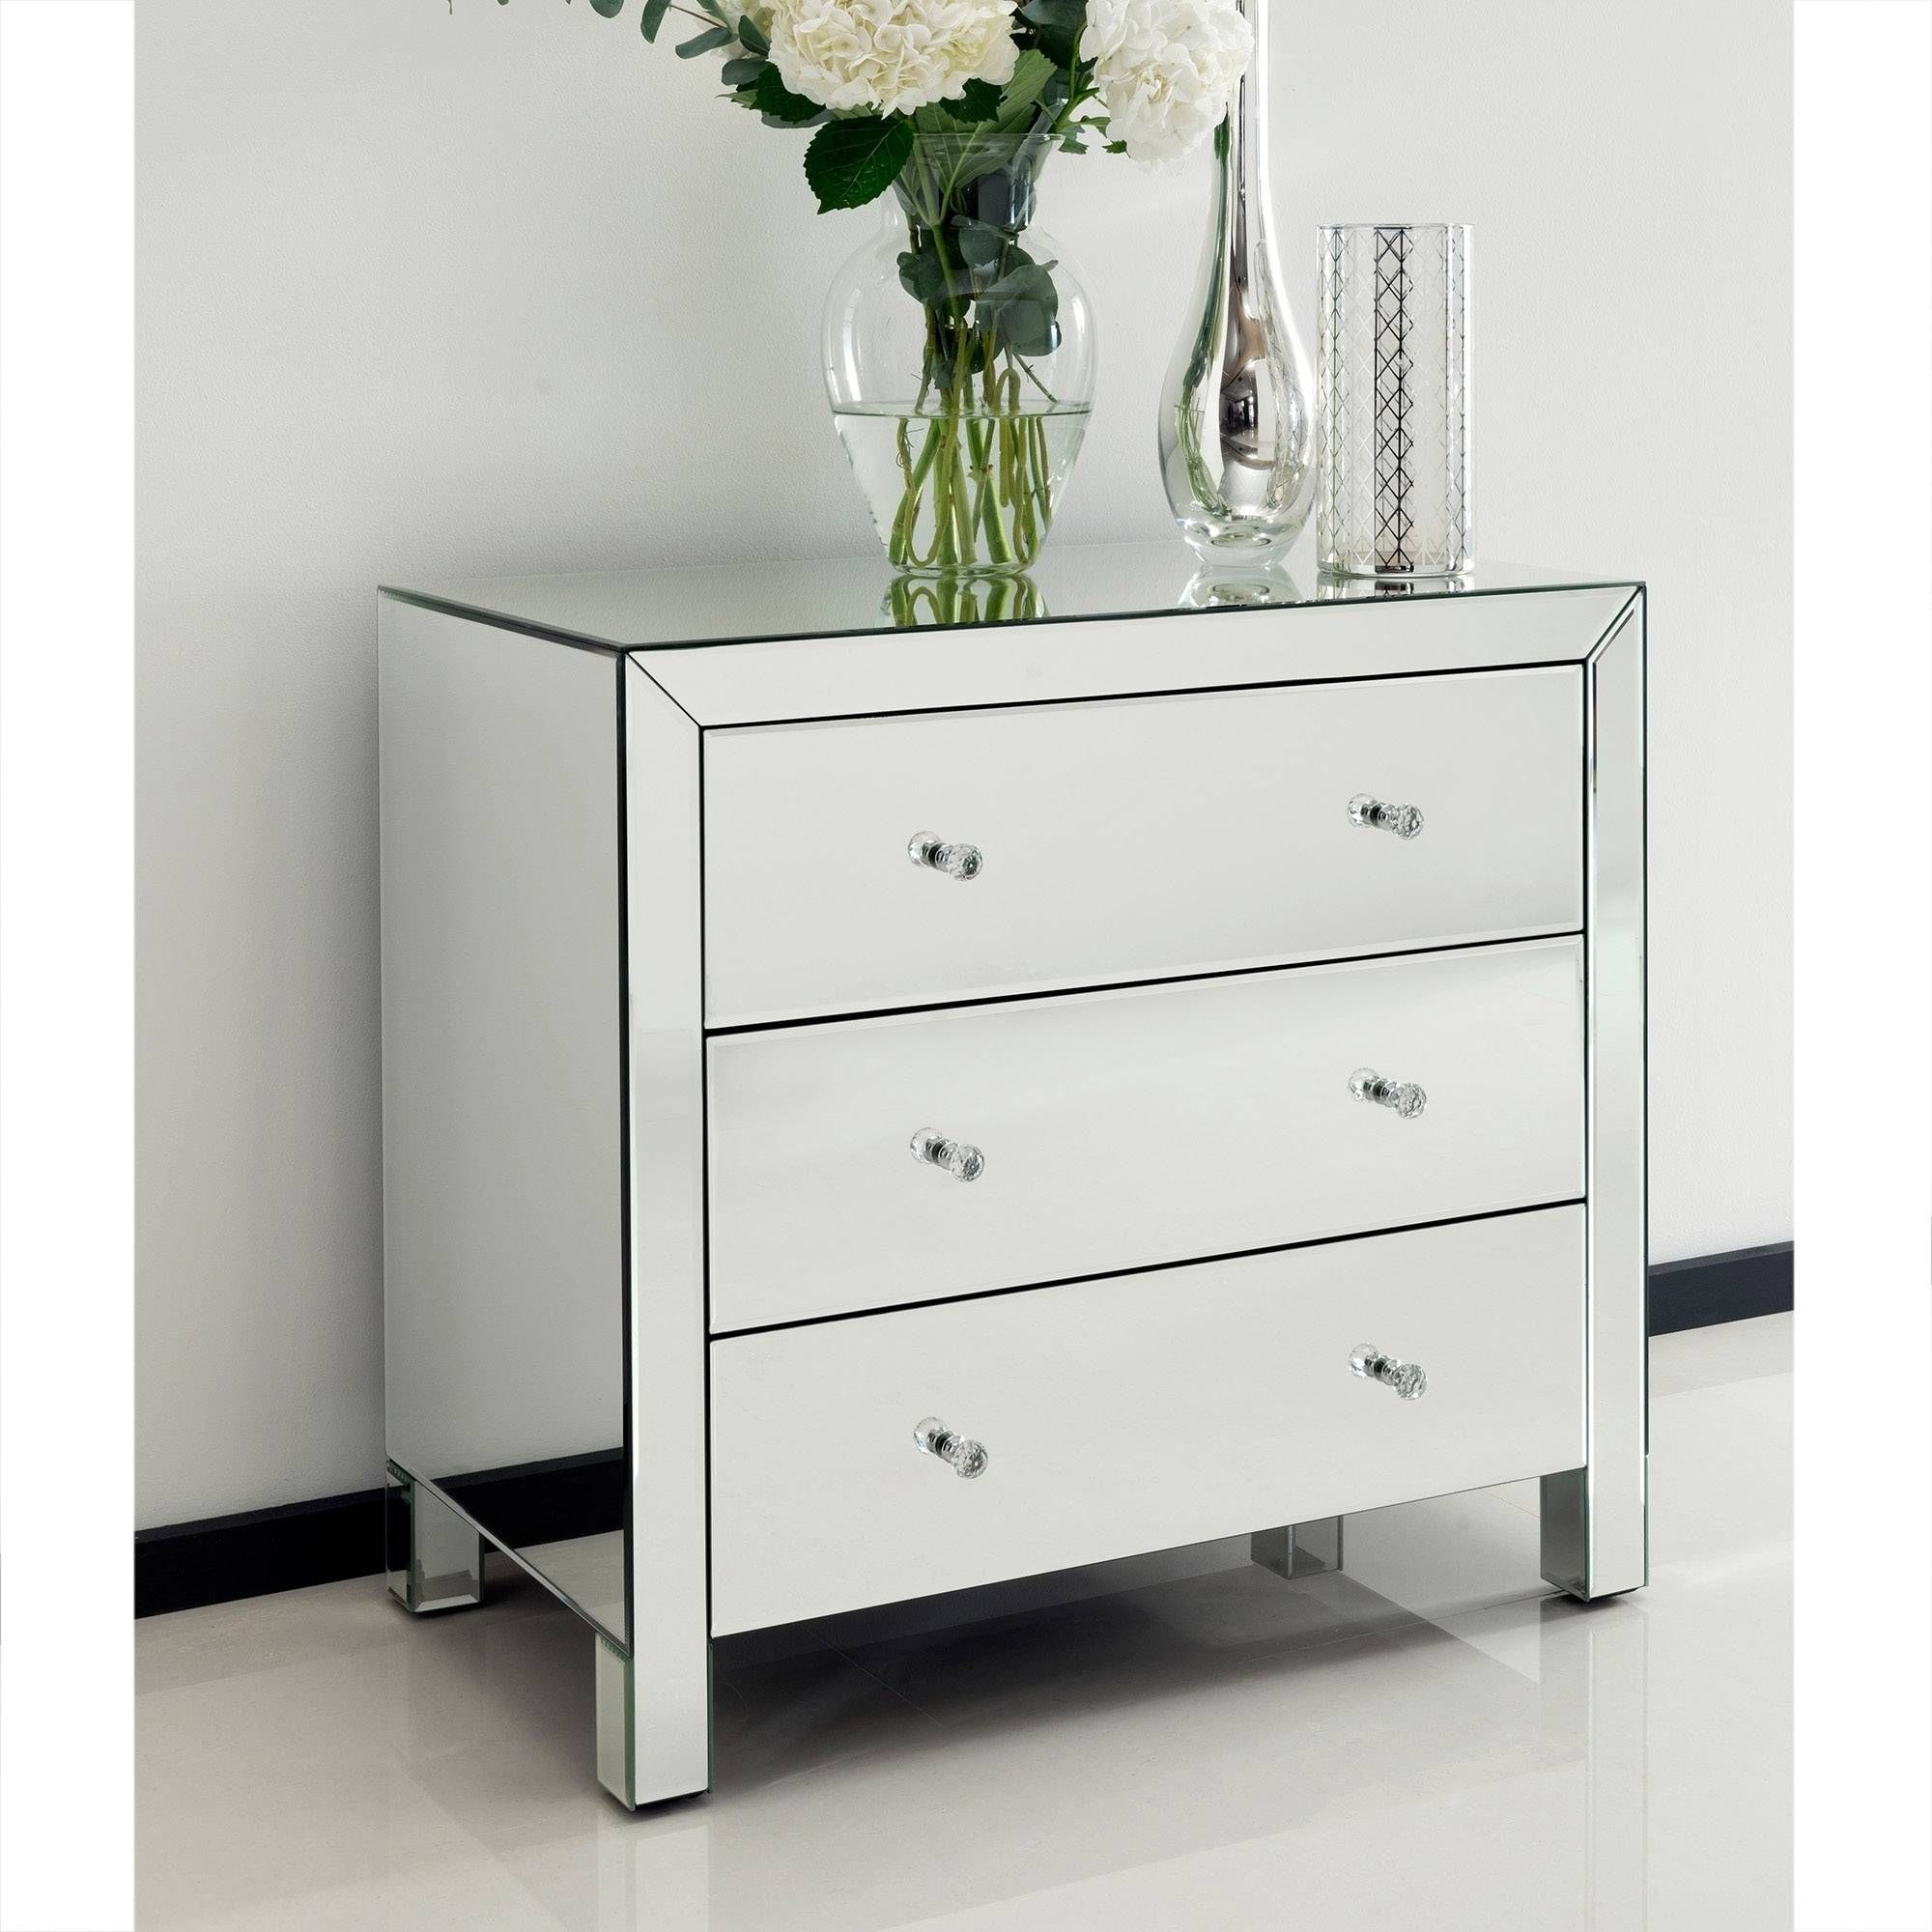 Romano Crystal Mirrored Chest 3 Drawer | Venetian Mirrored Furniture For Venetian Mirrored Chest Of Drawers (View 1 of 25)